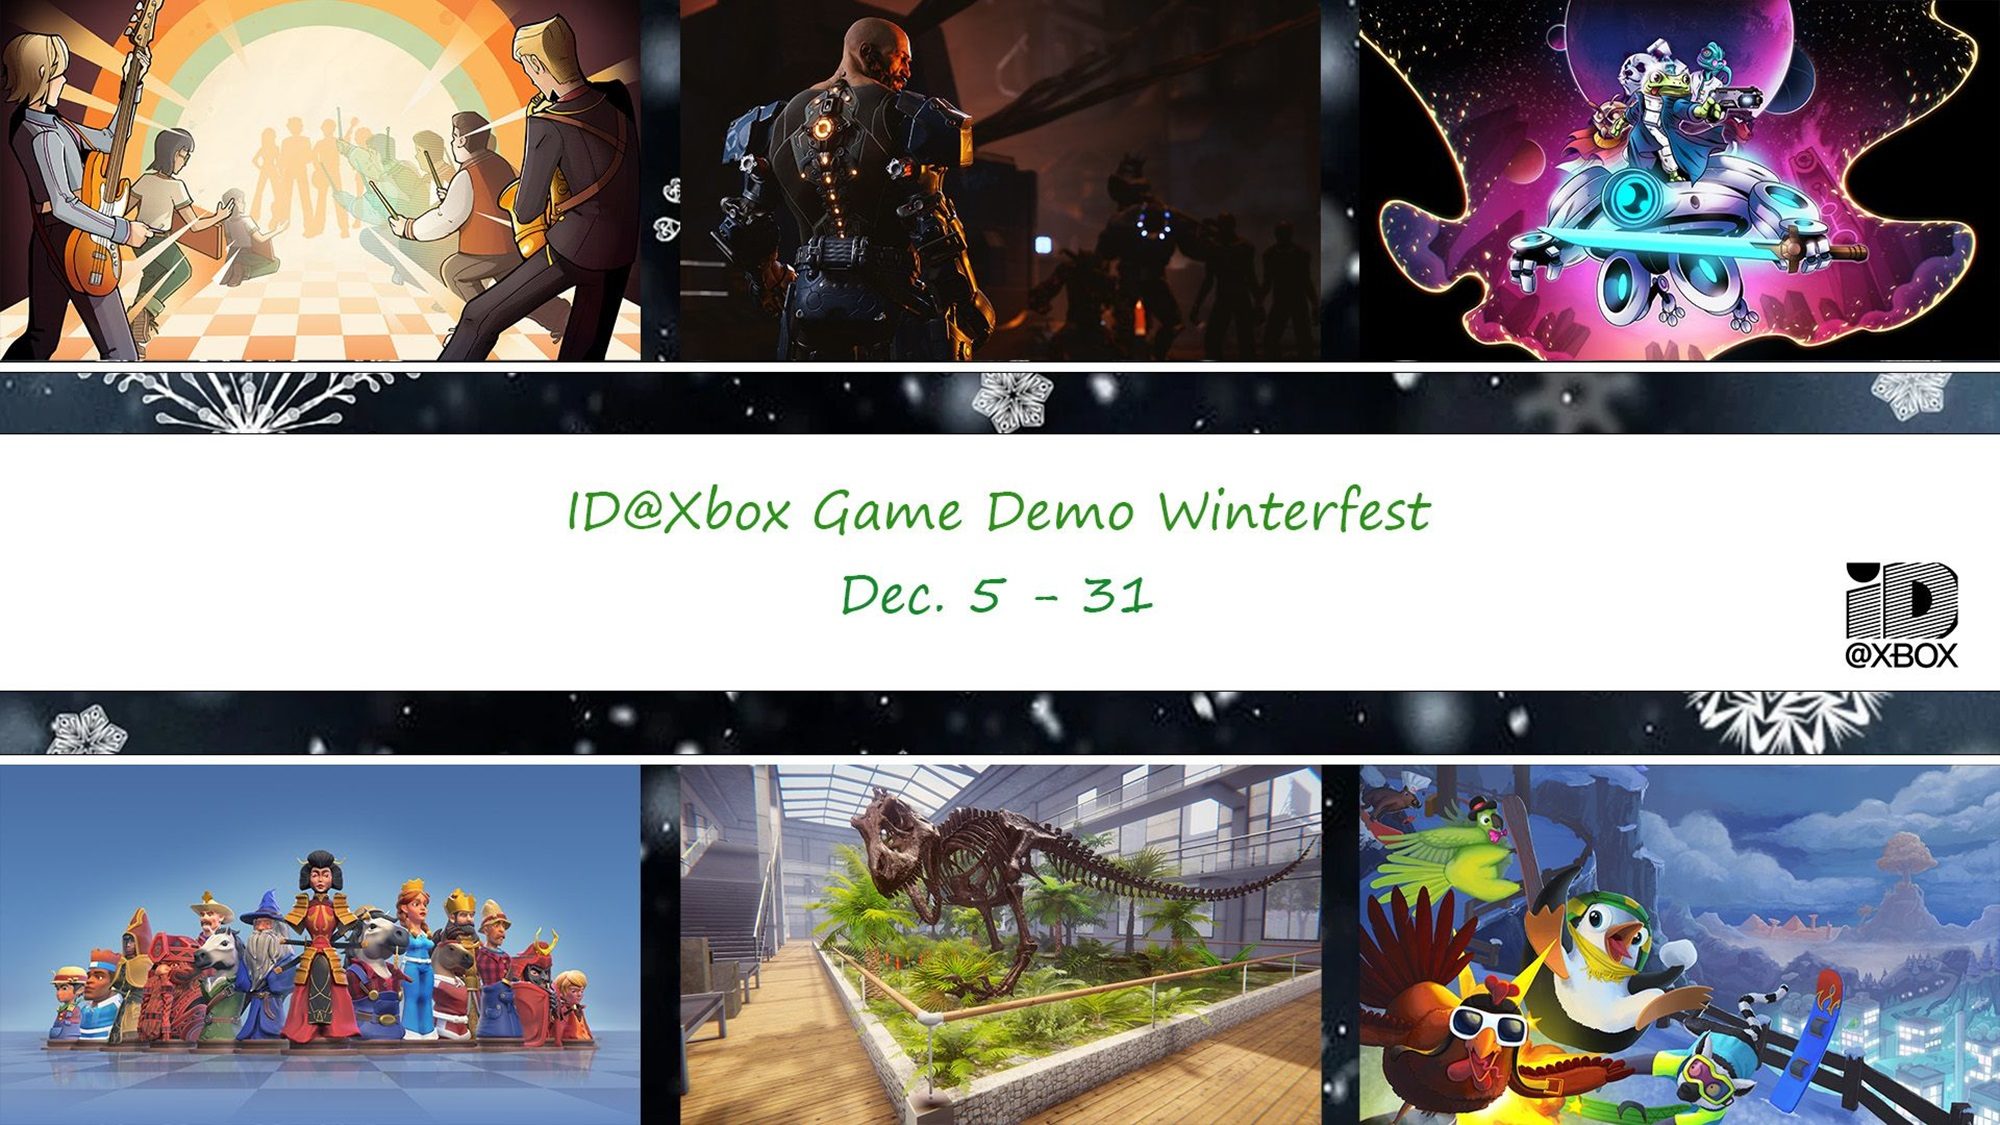 Xbox Game Pass reveals new games for December 2023